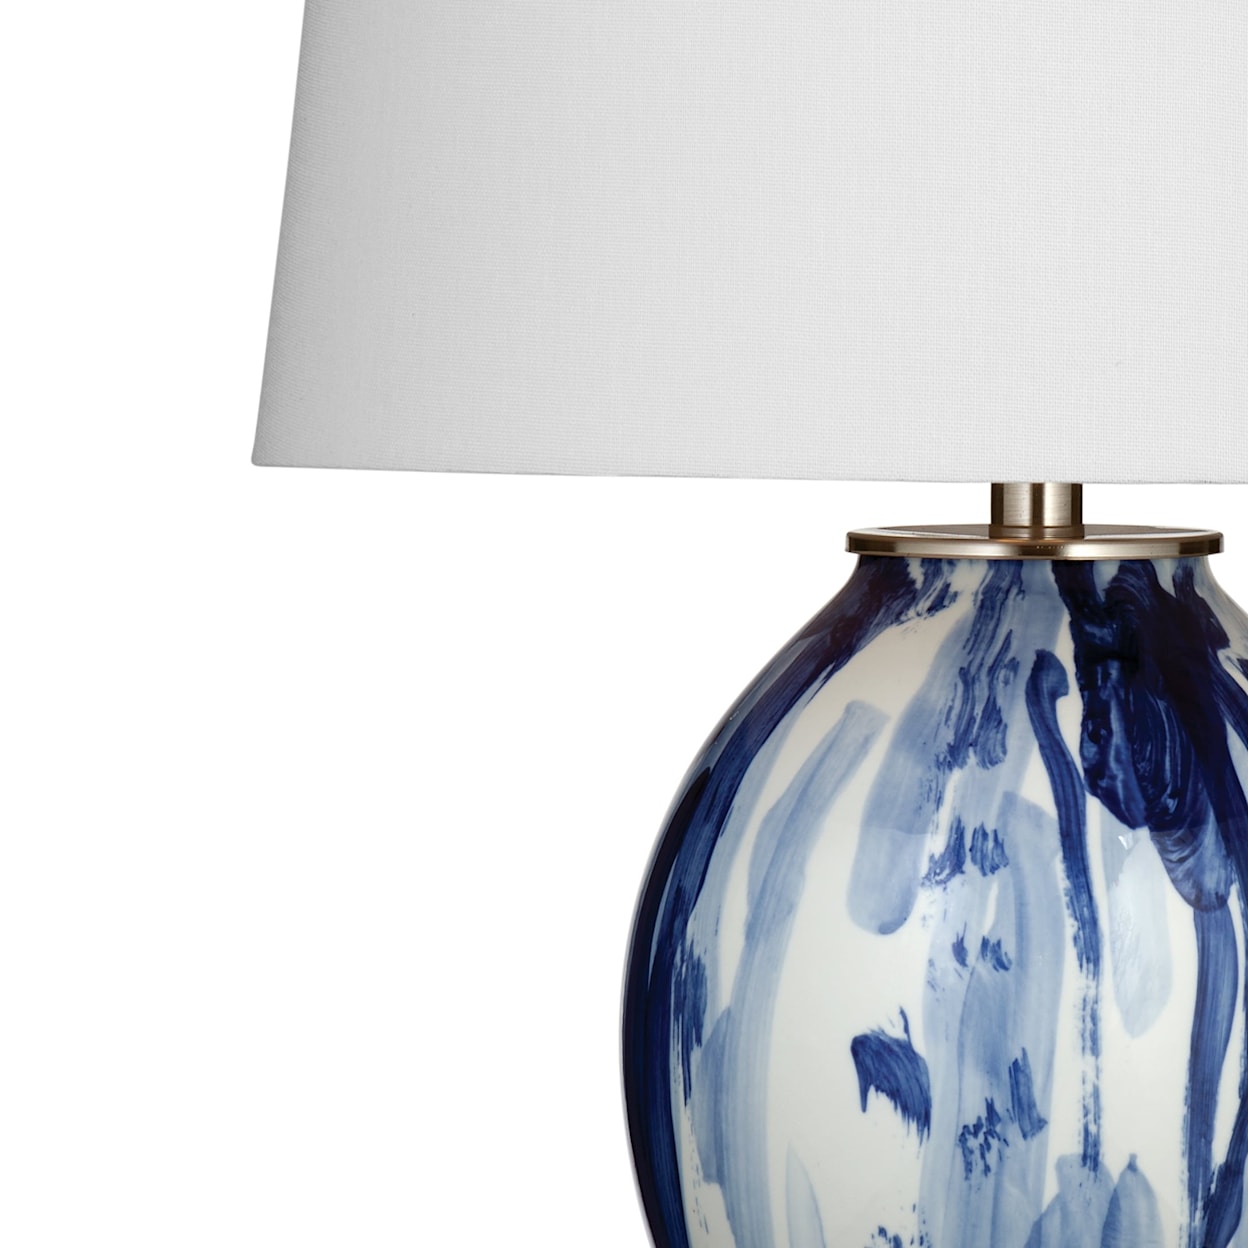 Bassett Mirror Table Lamps Canady Table Lamp